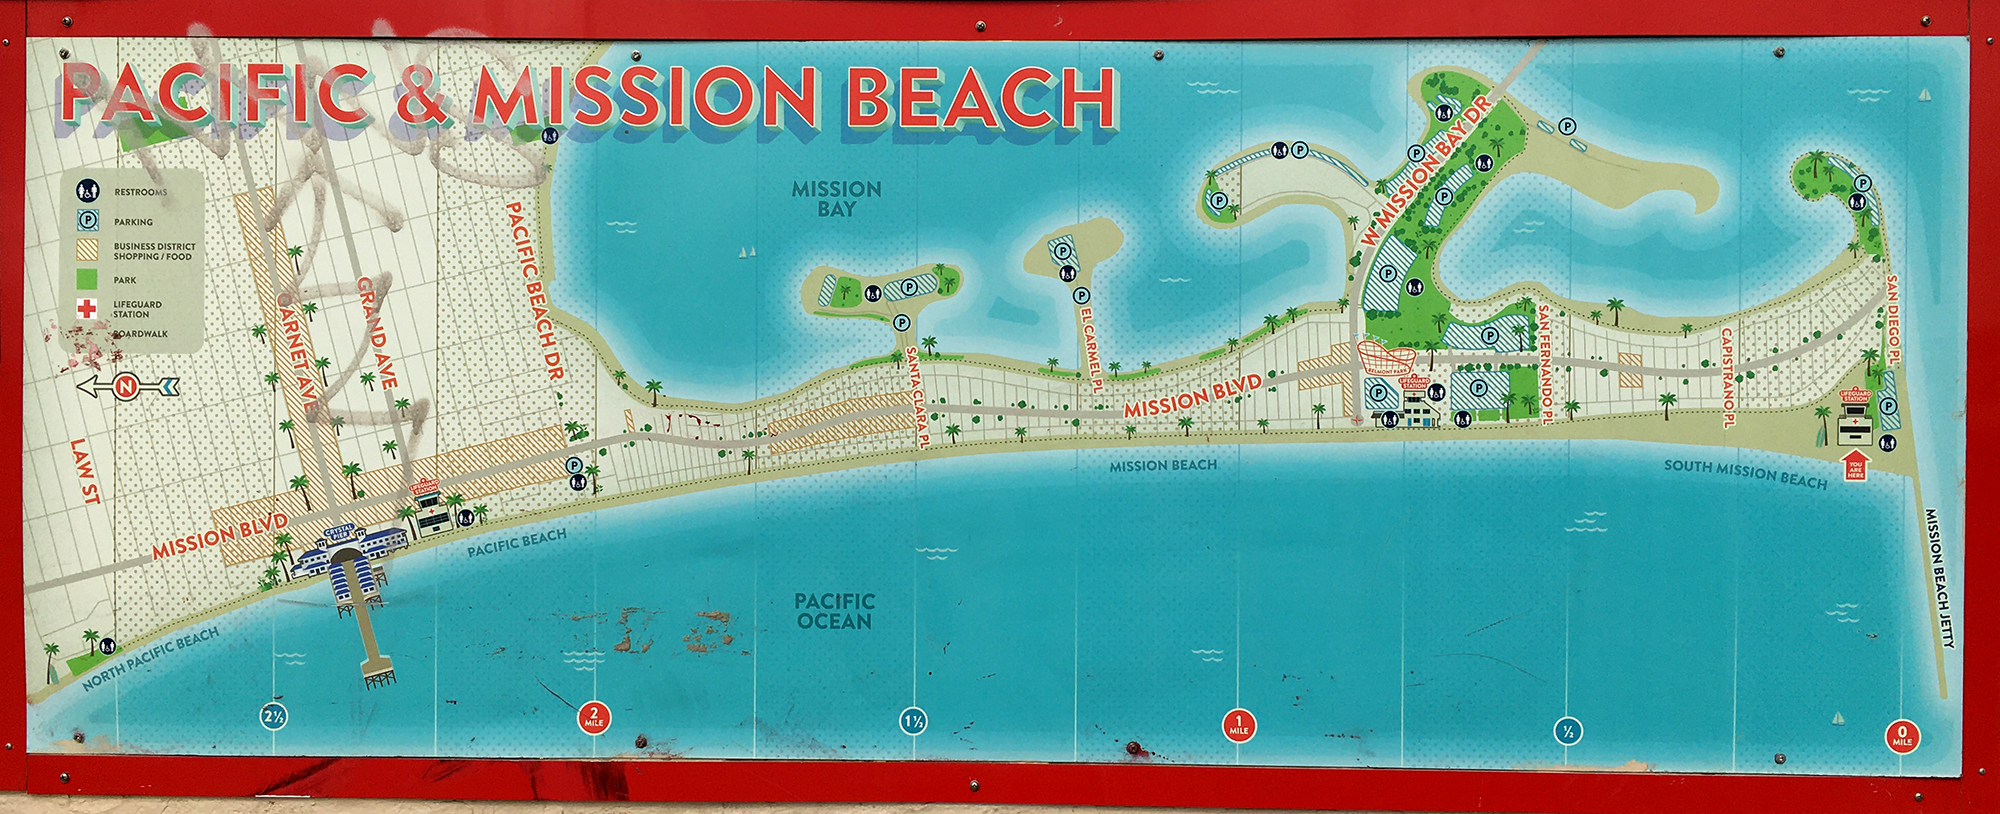 Map Of Mission Beach Boardwalk From Pacific Beach To South Mission